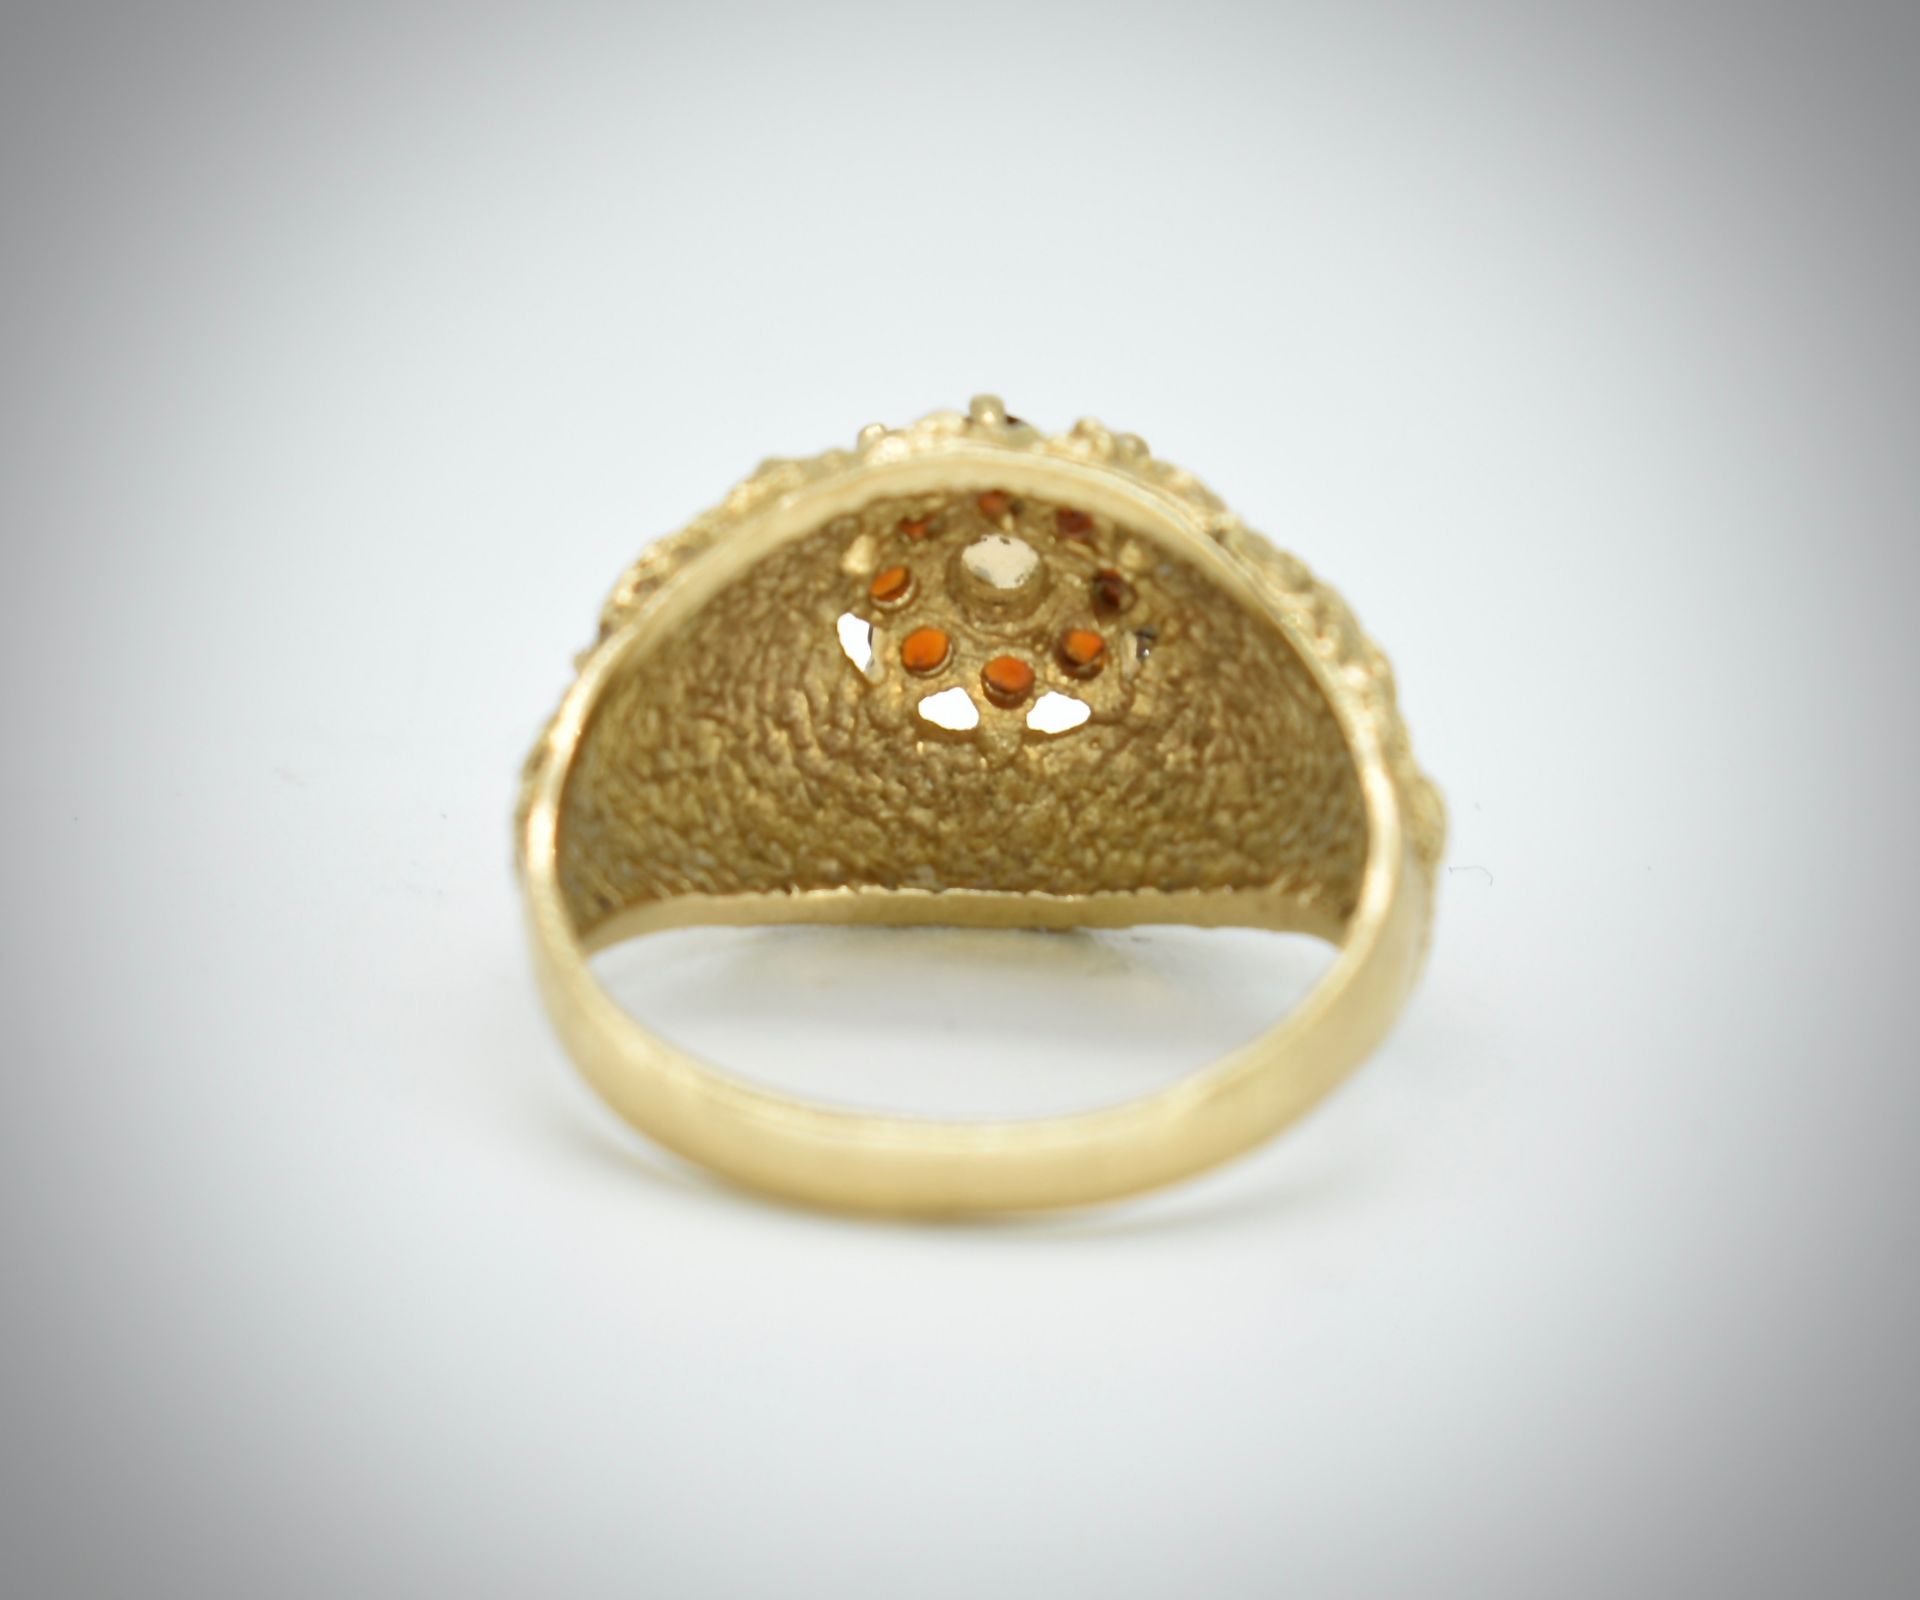 9ct Gold Opal & Garnet Dome Ring - Image 4 of 4